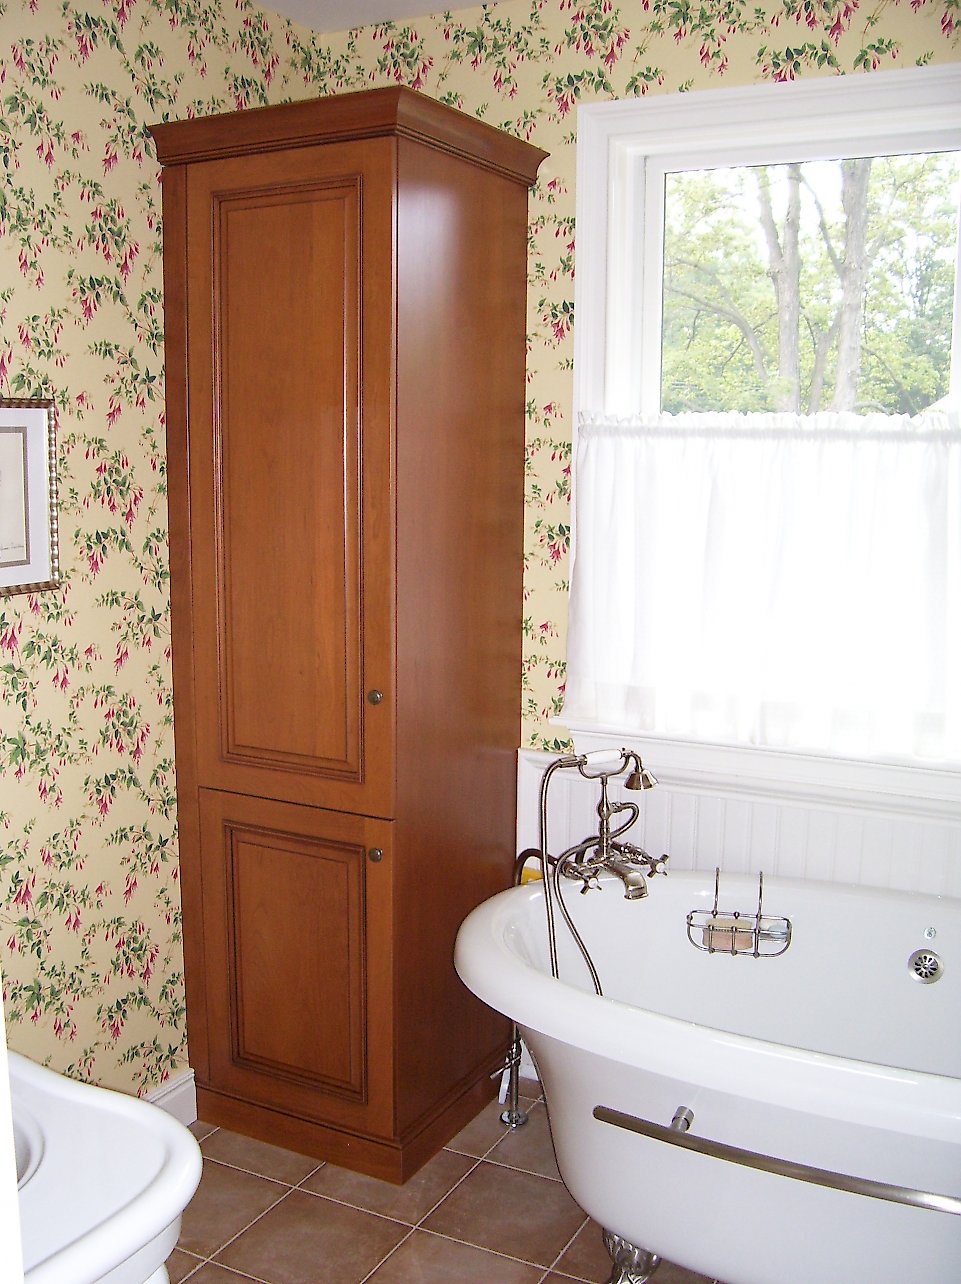 Cherry linen cabinet next to the tub.